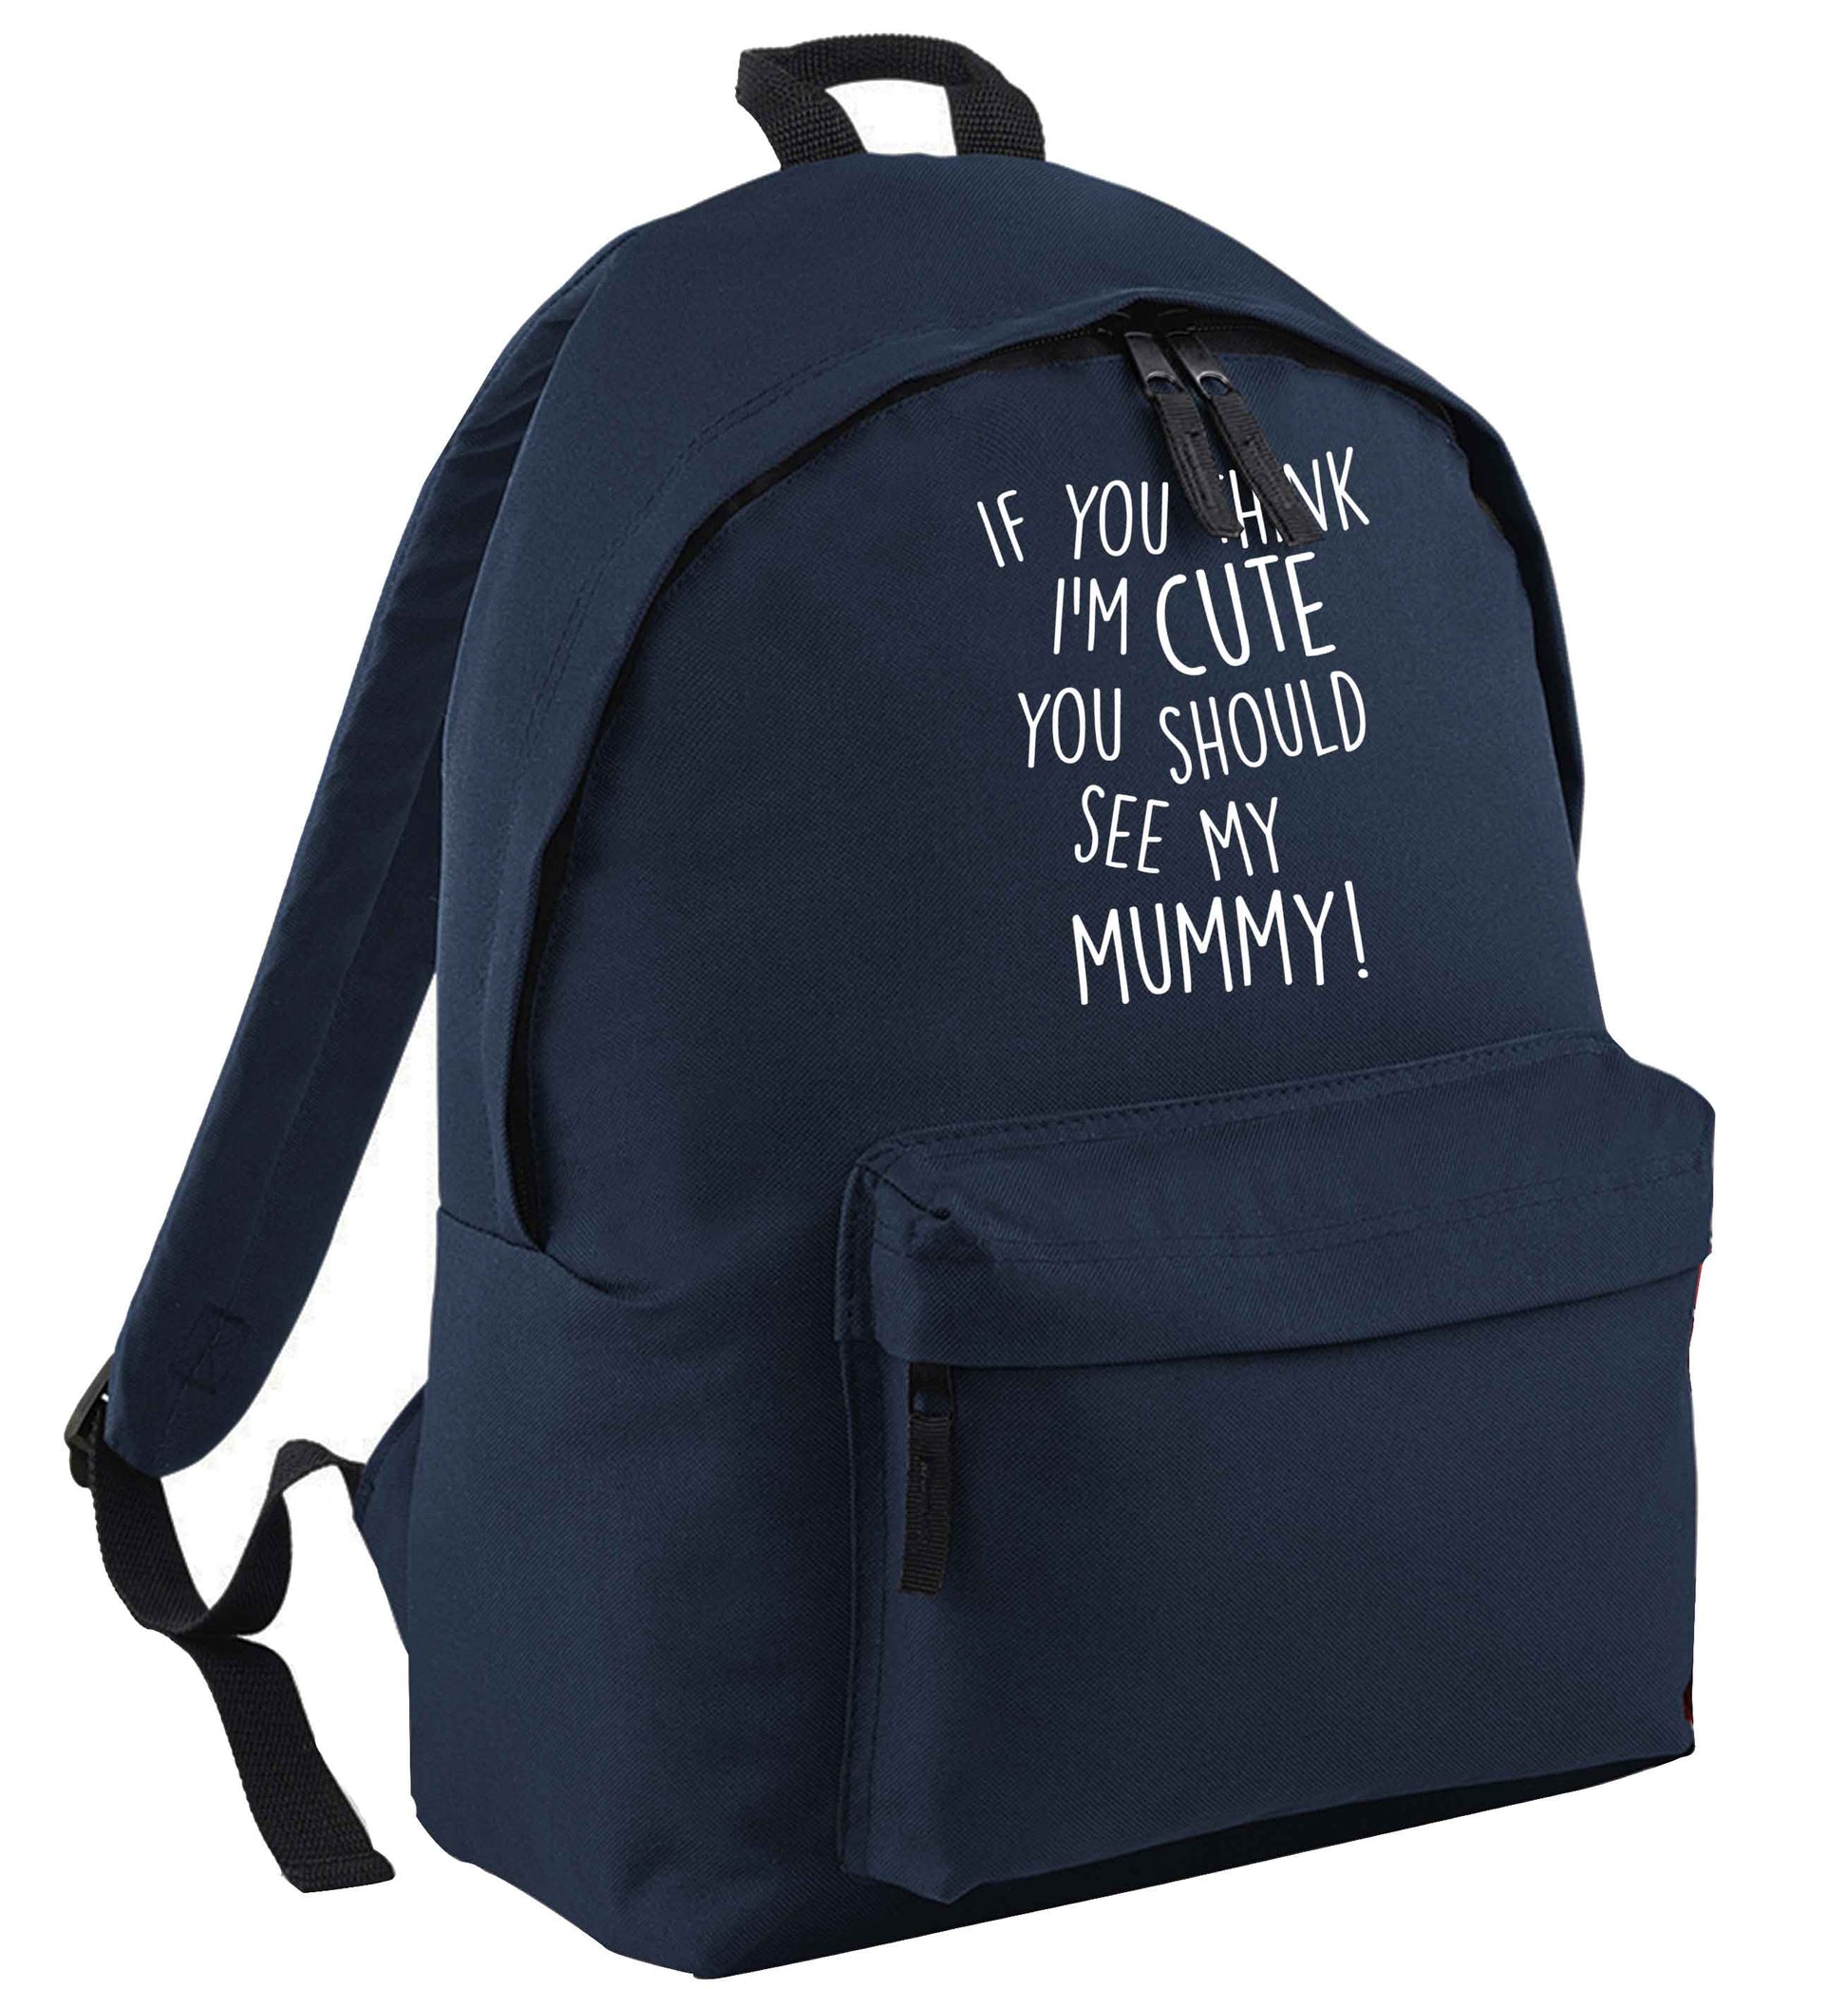 If you think I'm cute you should see my mummy navy adults backpack